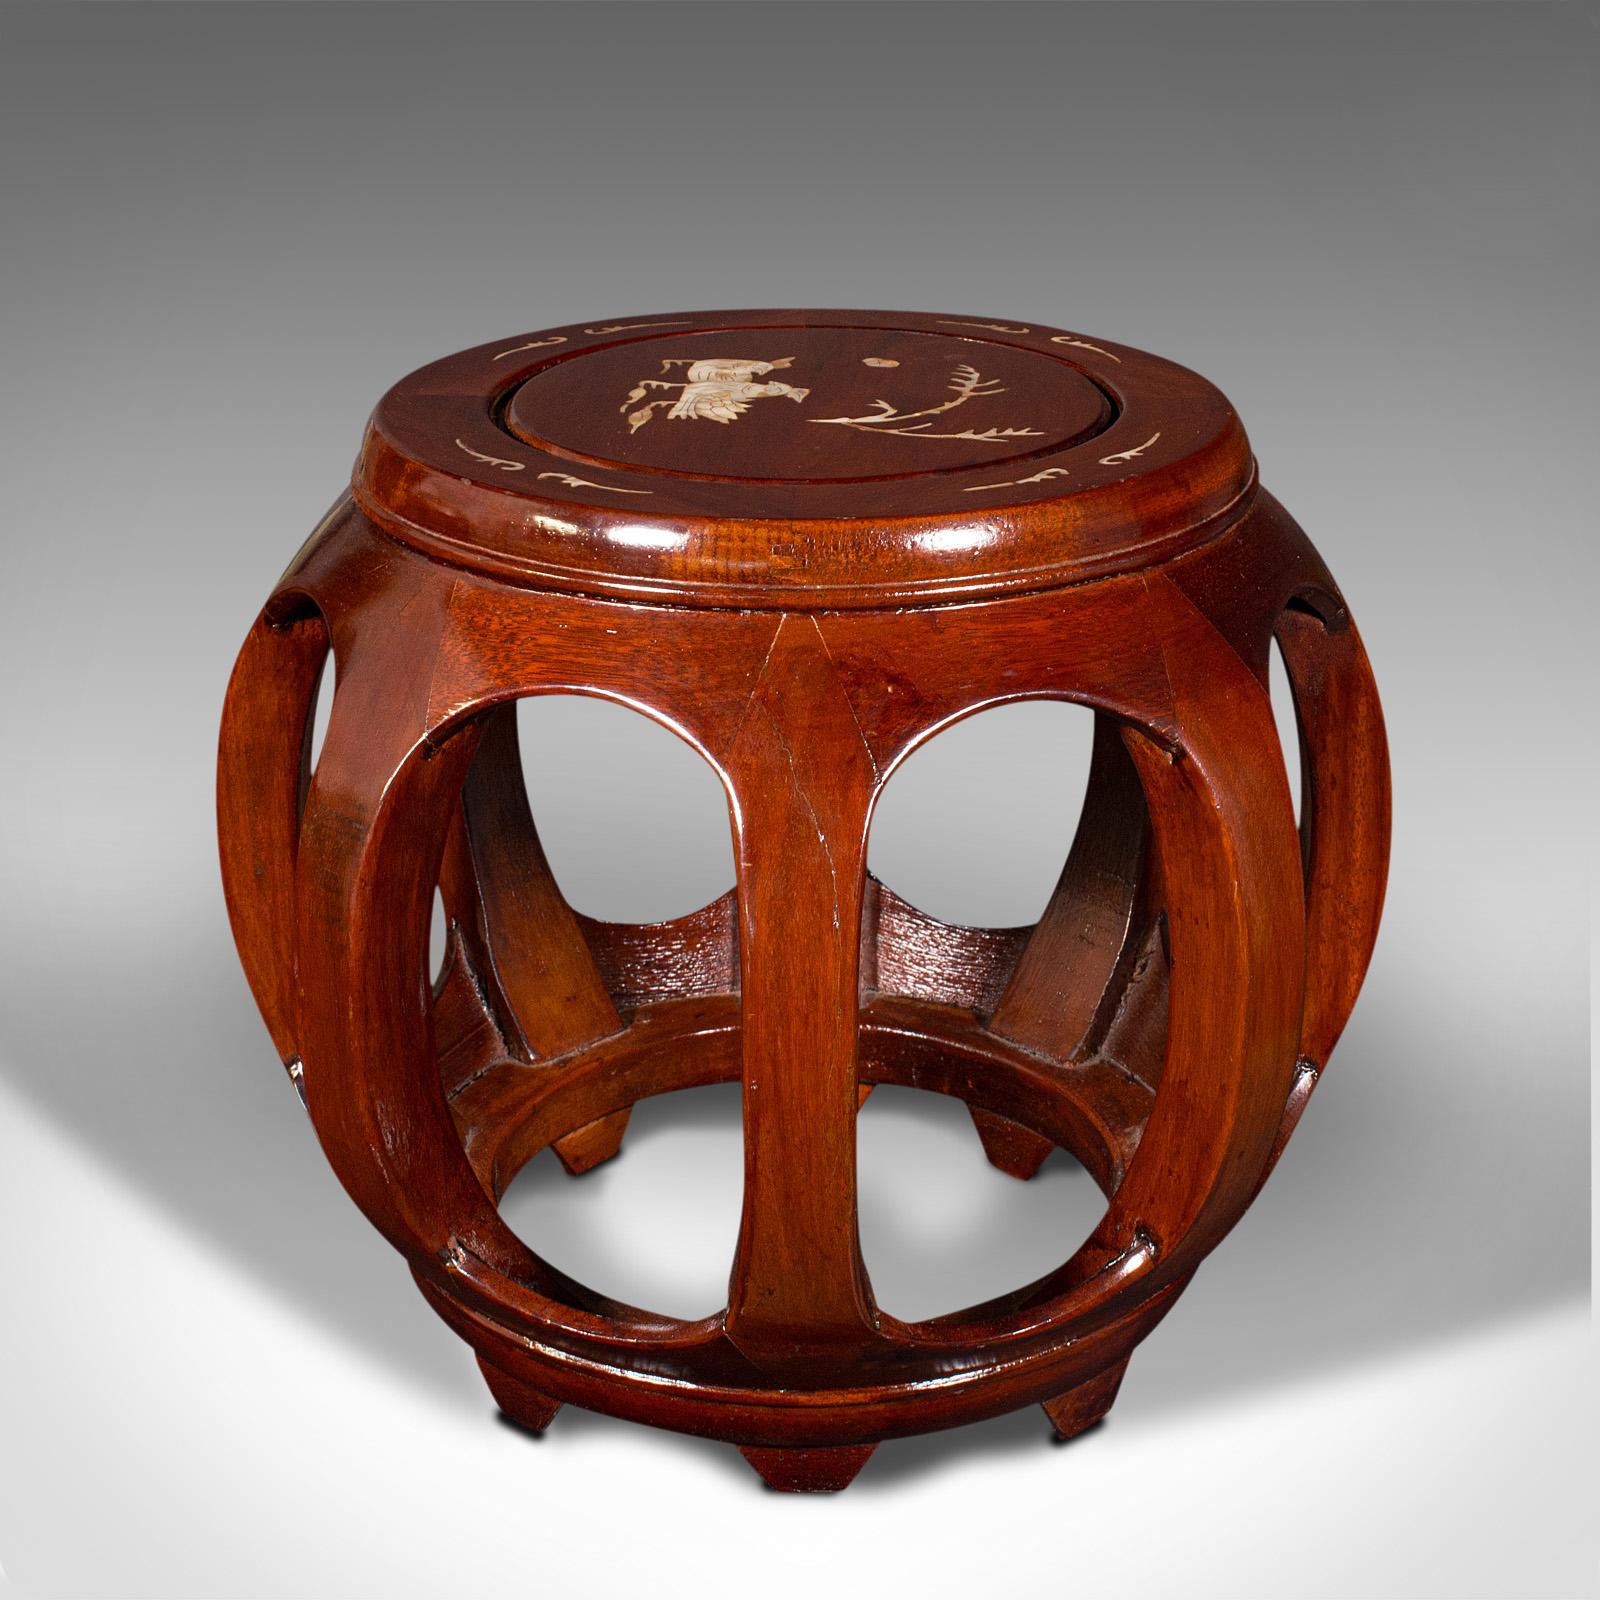 Wood Pair Of Vintage Barrel Stools, Chinese, Inlaid, Decorative Display Stand, C.1970 For Sale